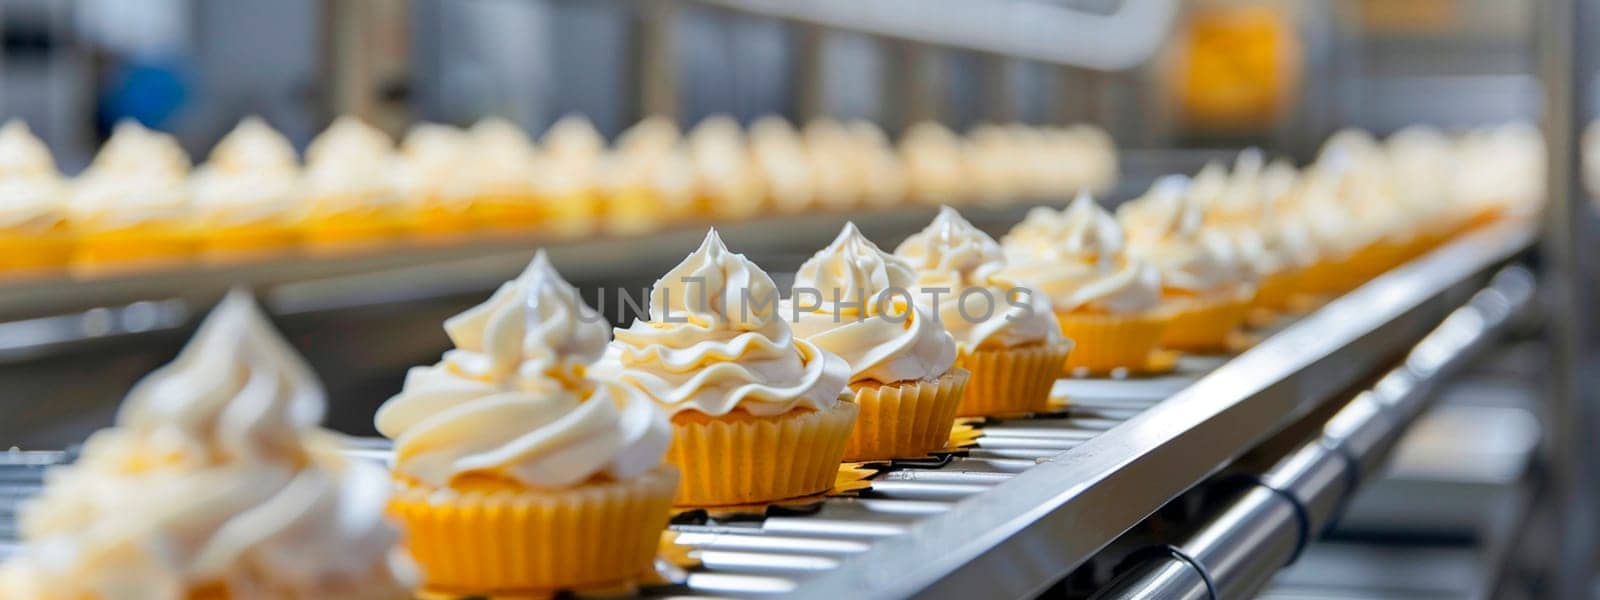 cupcakes in the factory industry. Selective focus. by yanadjana